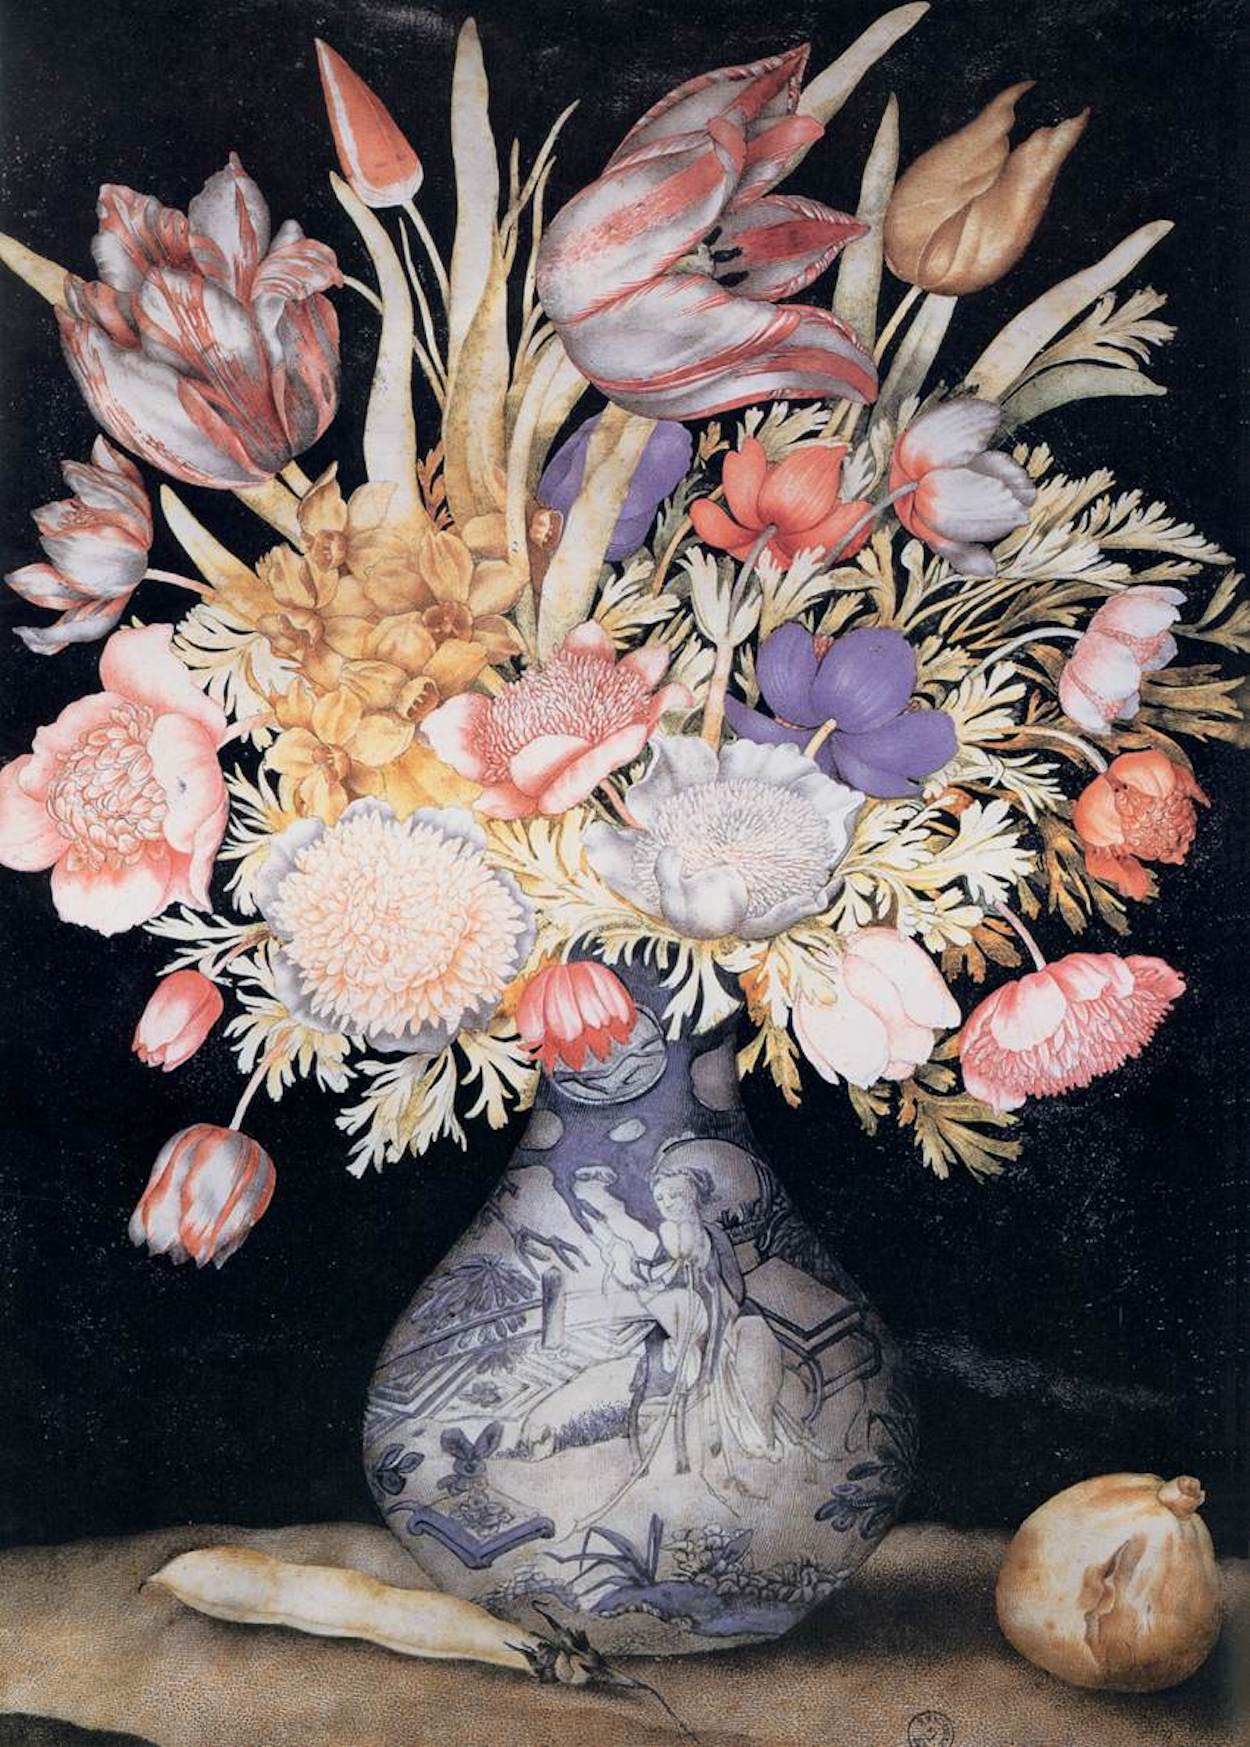 Chinese Vase With Flowers and Fruits by Giovanna Garzoni - c. 1641–1652 - 51 x 36.9 cm Galleria degli Uffizi